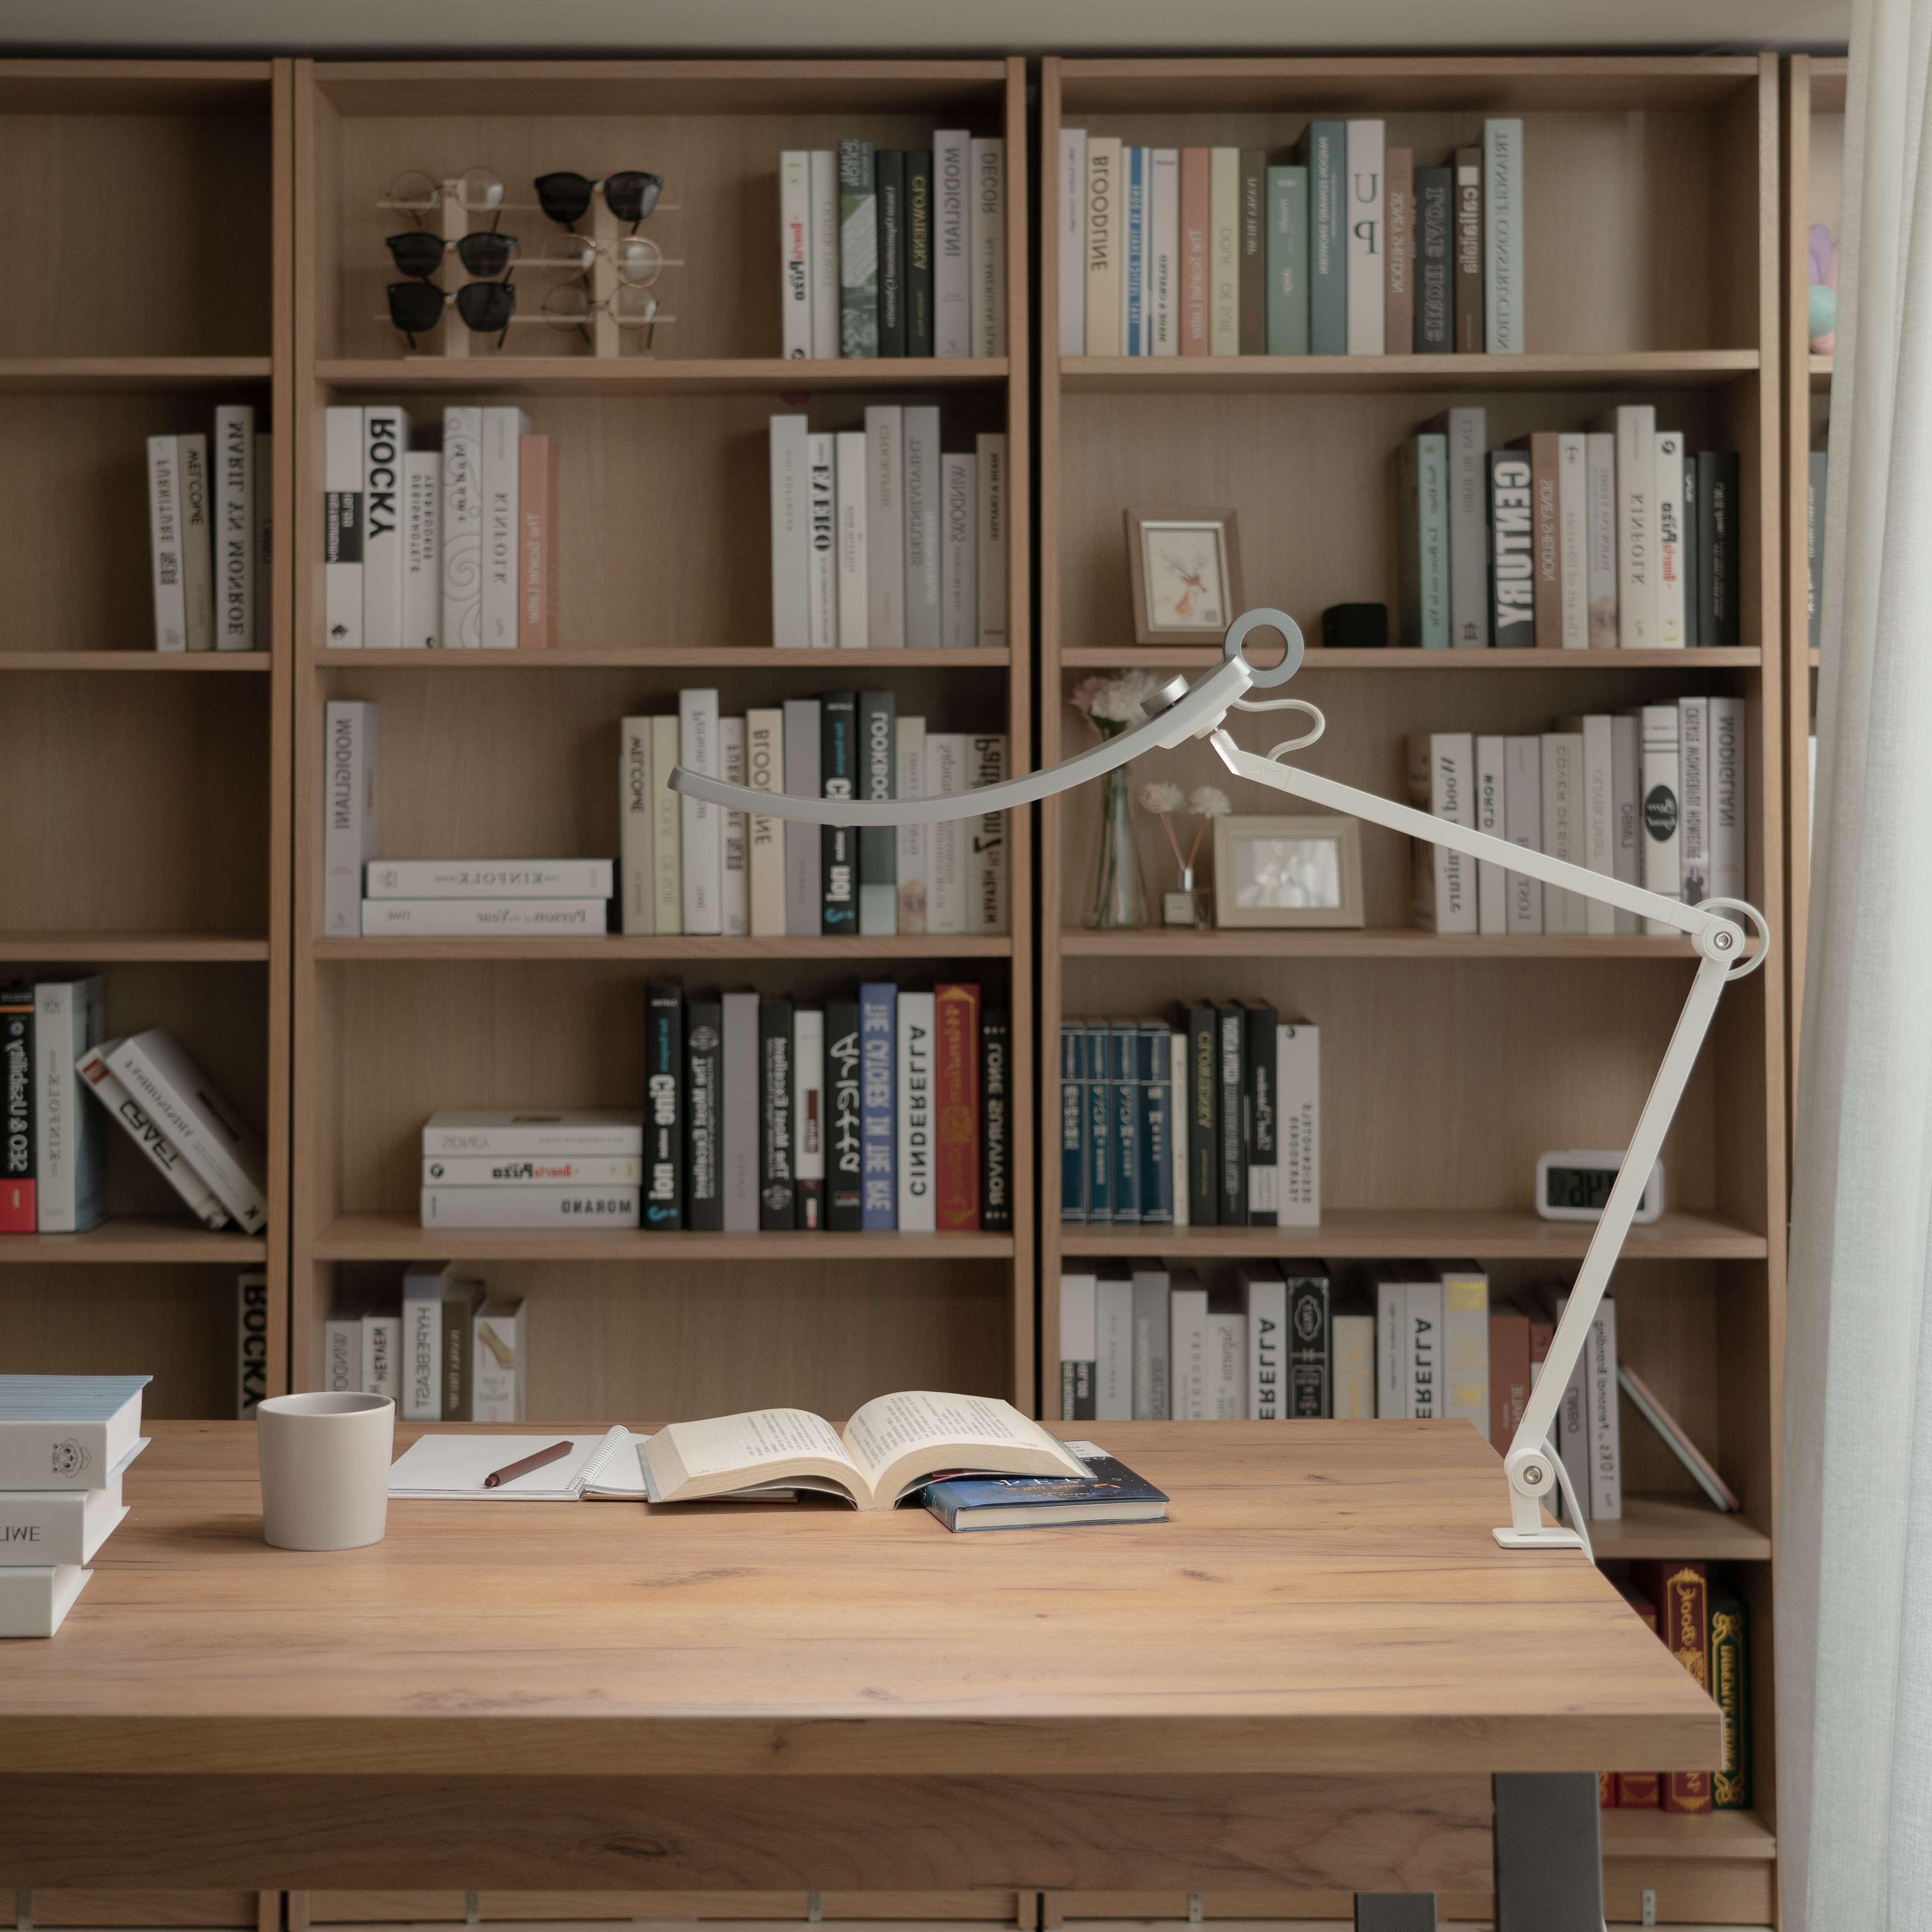 reading desk lamp placing on the left hand side of the reader